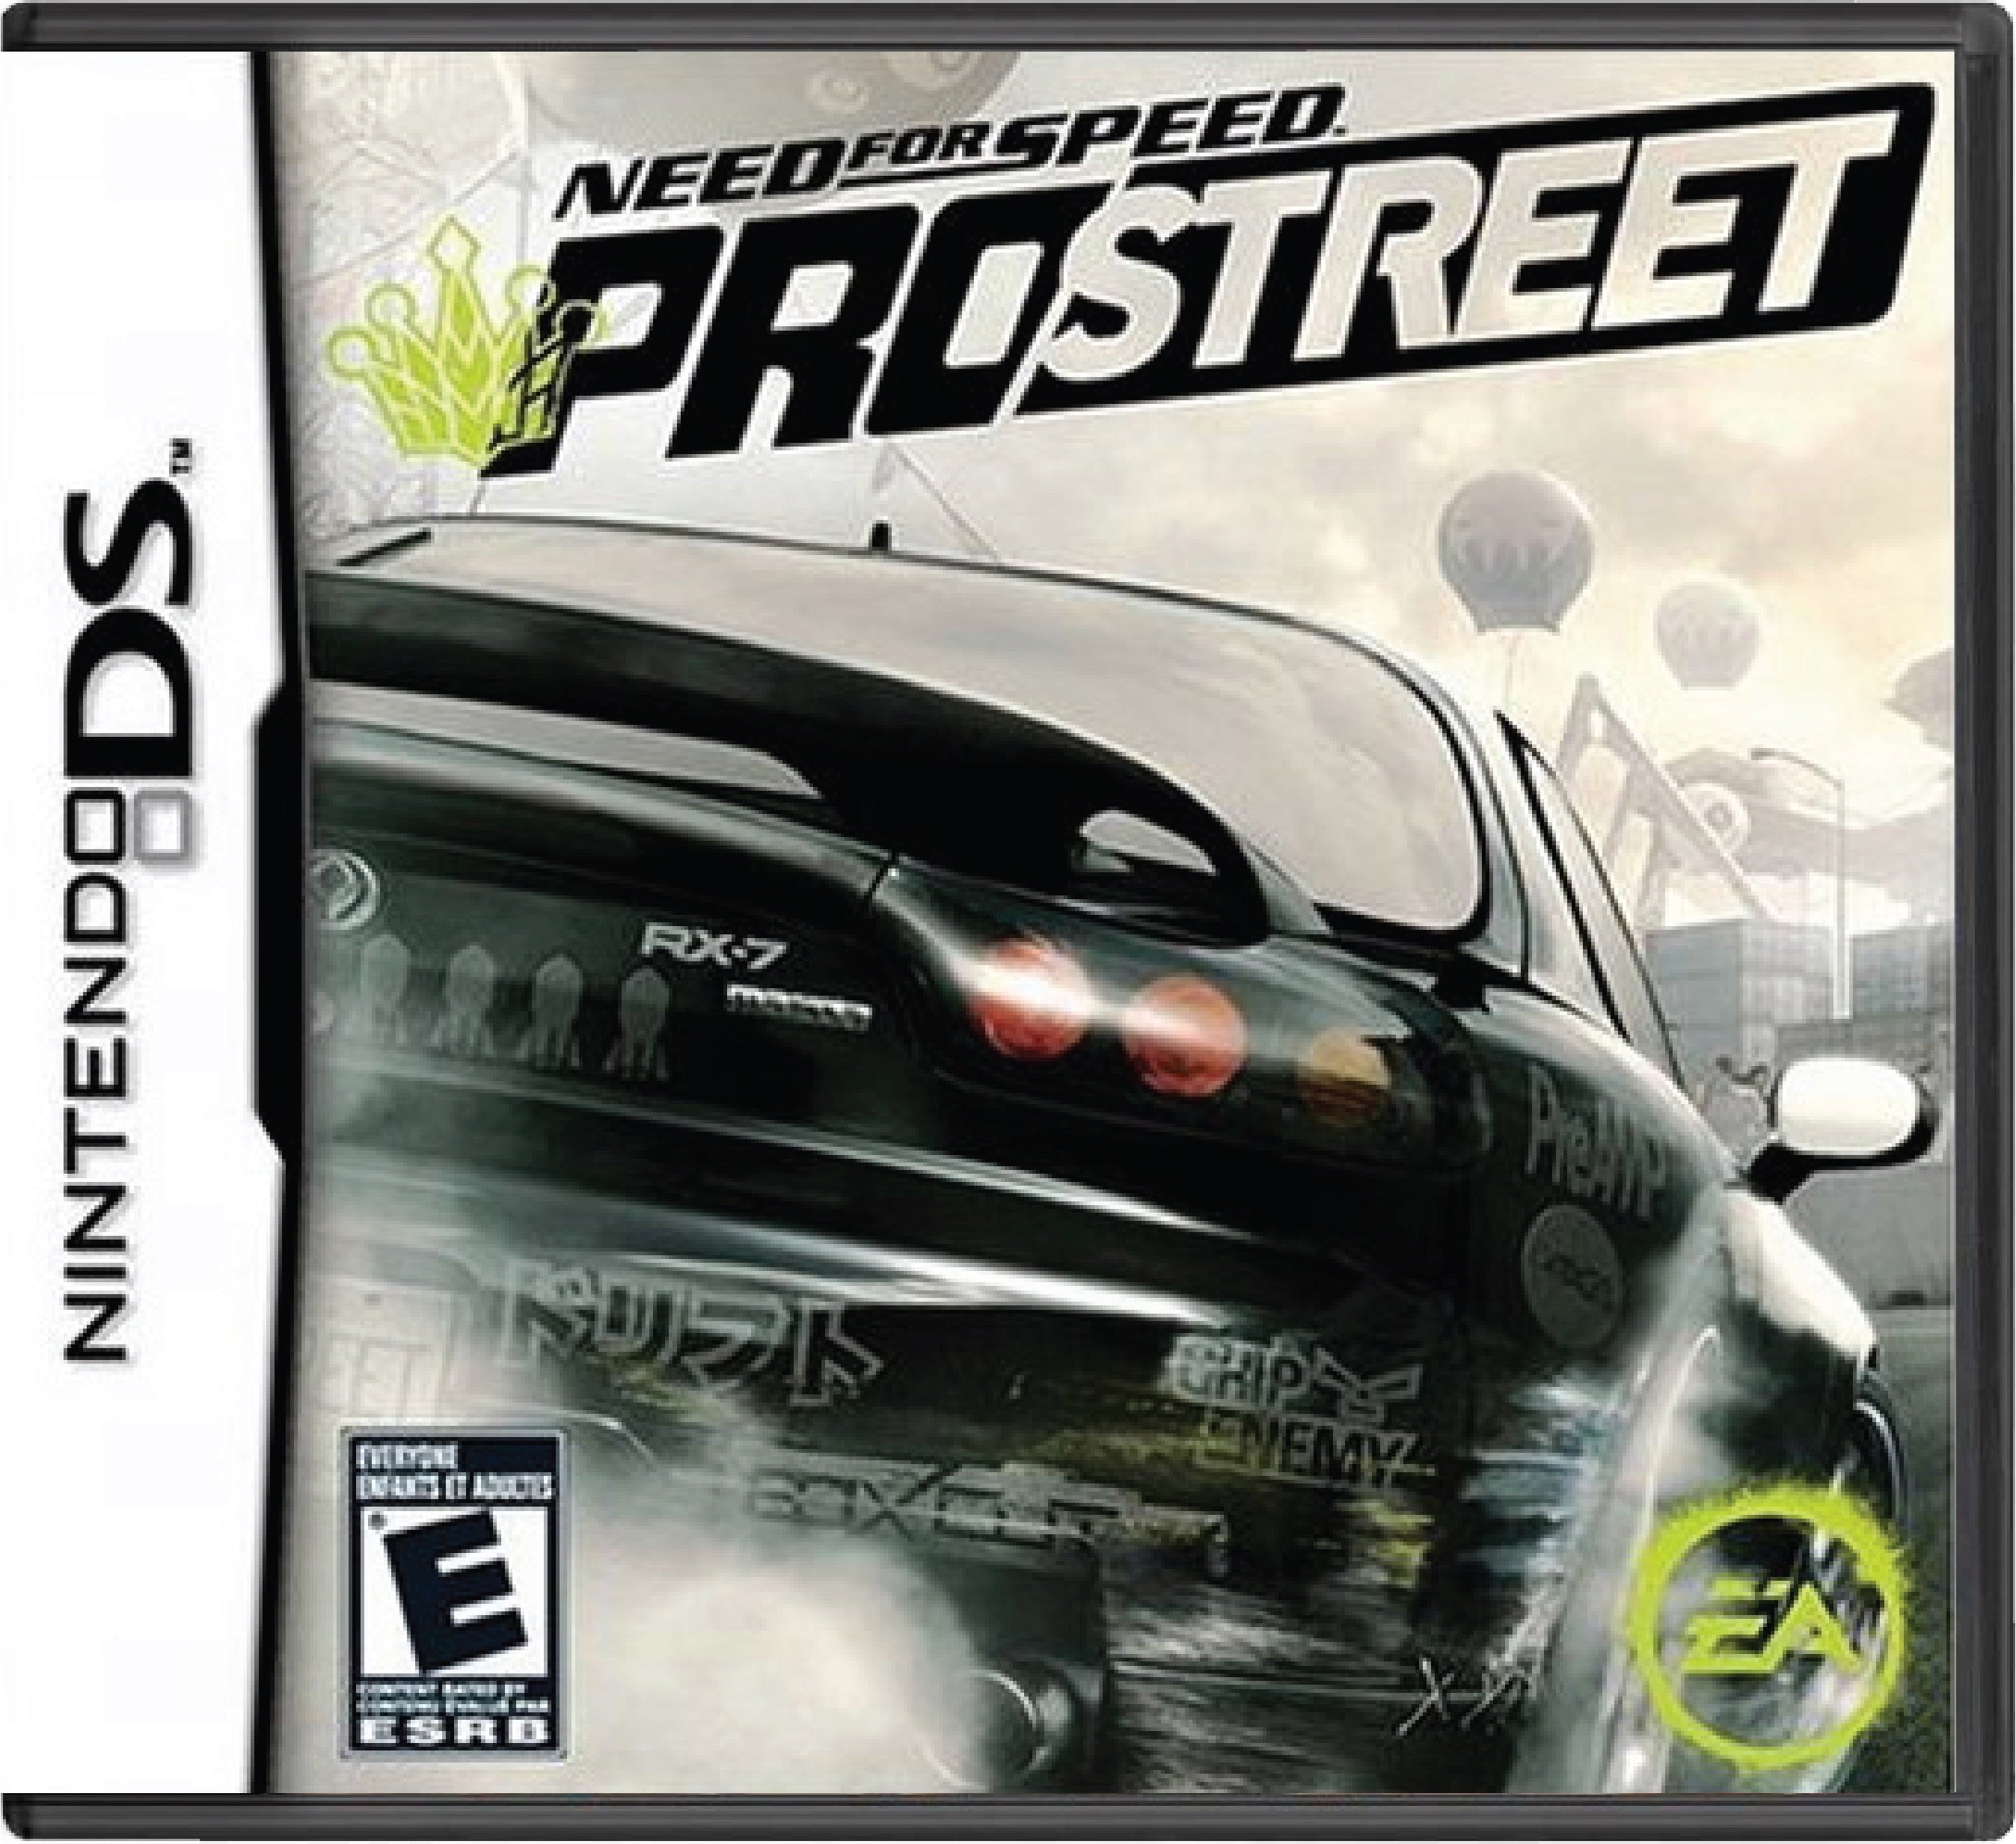 Need for Speed Prostreet Cover Art